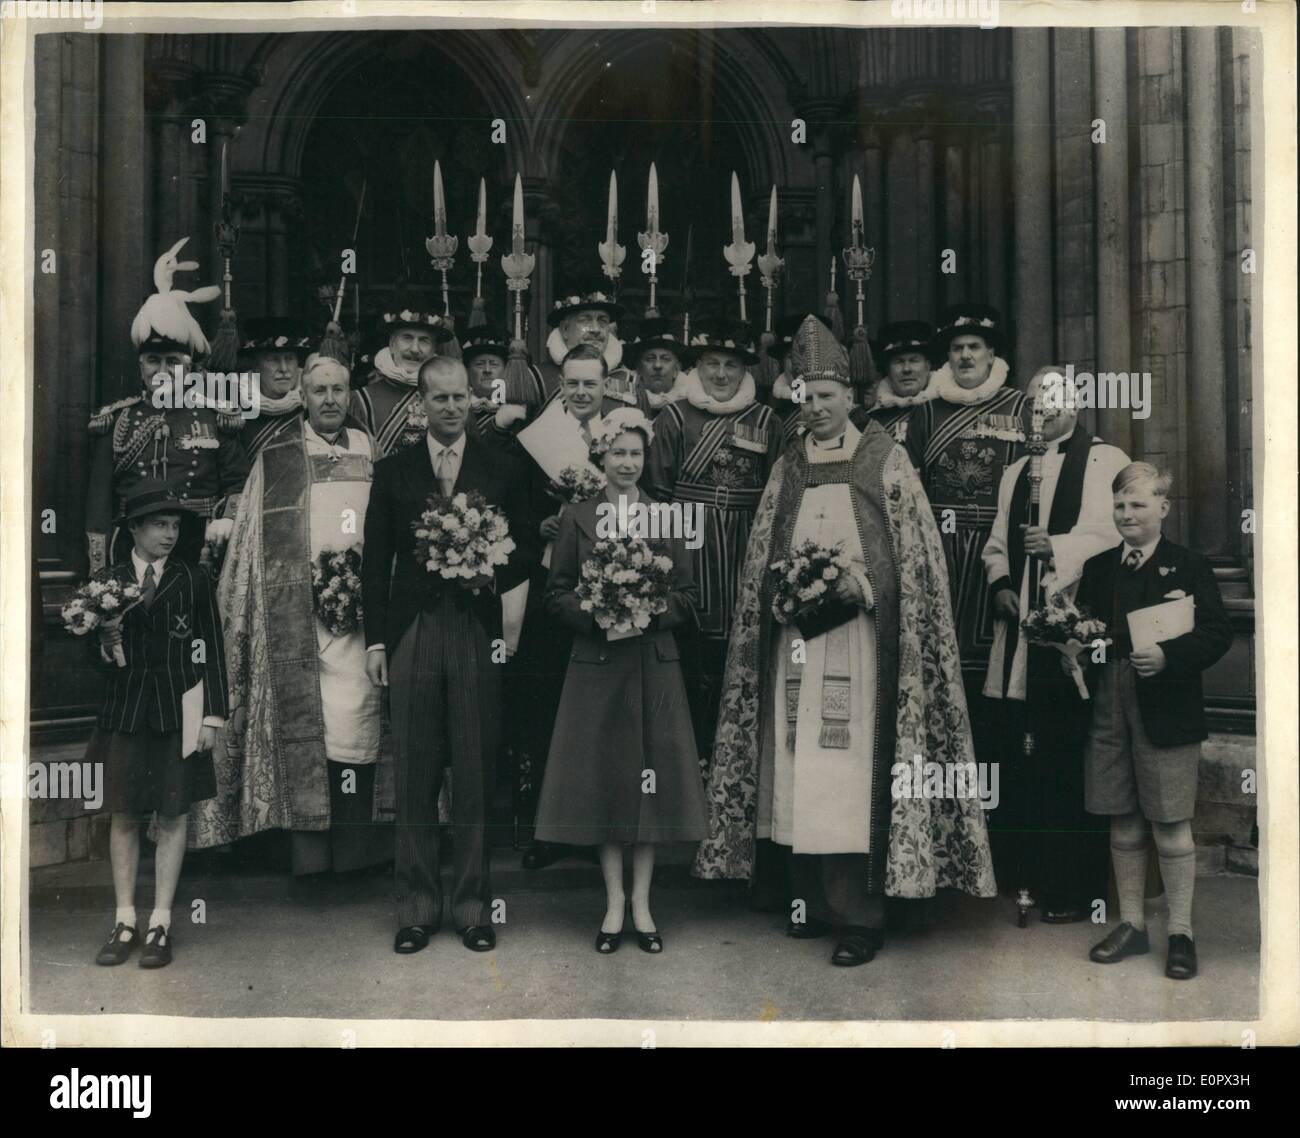 Apr. 04, 1957 - The Queen and Prince Philip Distribute Maundy Money at St. Albans-Abbey for the First Time: The aged and needy folk of St. Albana received the Royal Maundy Money from the Queen today, the first time since Charles ''11'' is reign that this ancient ceremony has been held outside London. Usually it is held at Westminster Abbey. Photo shows Queen Elizabeth and Prince Philip with officials and Yeomen, after the distribution by Her Majesty of the traditional Royal Maundy Money at St. Albans Abbey today Stock Photo